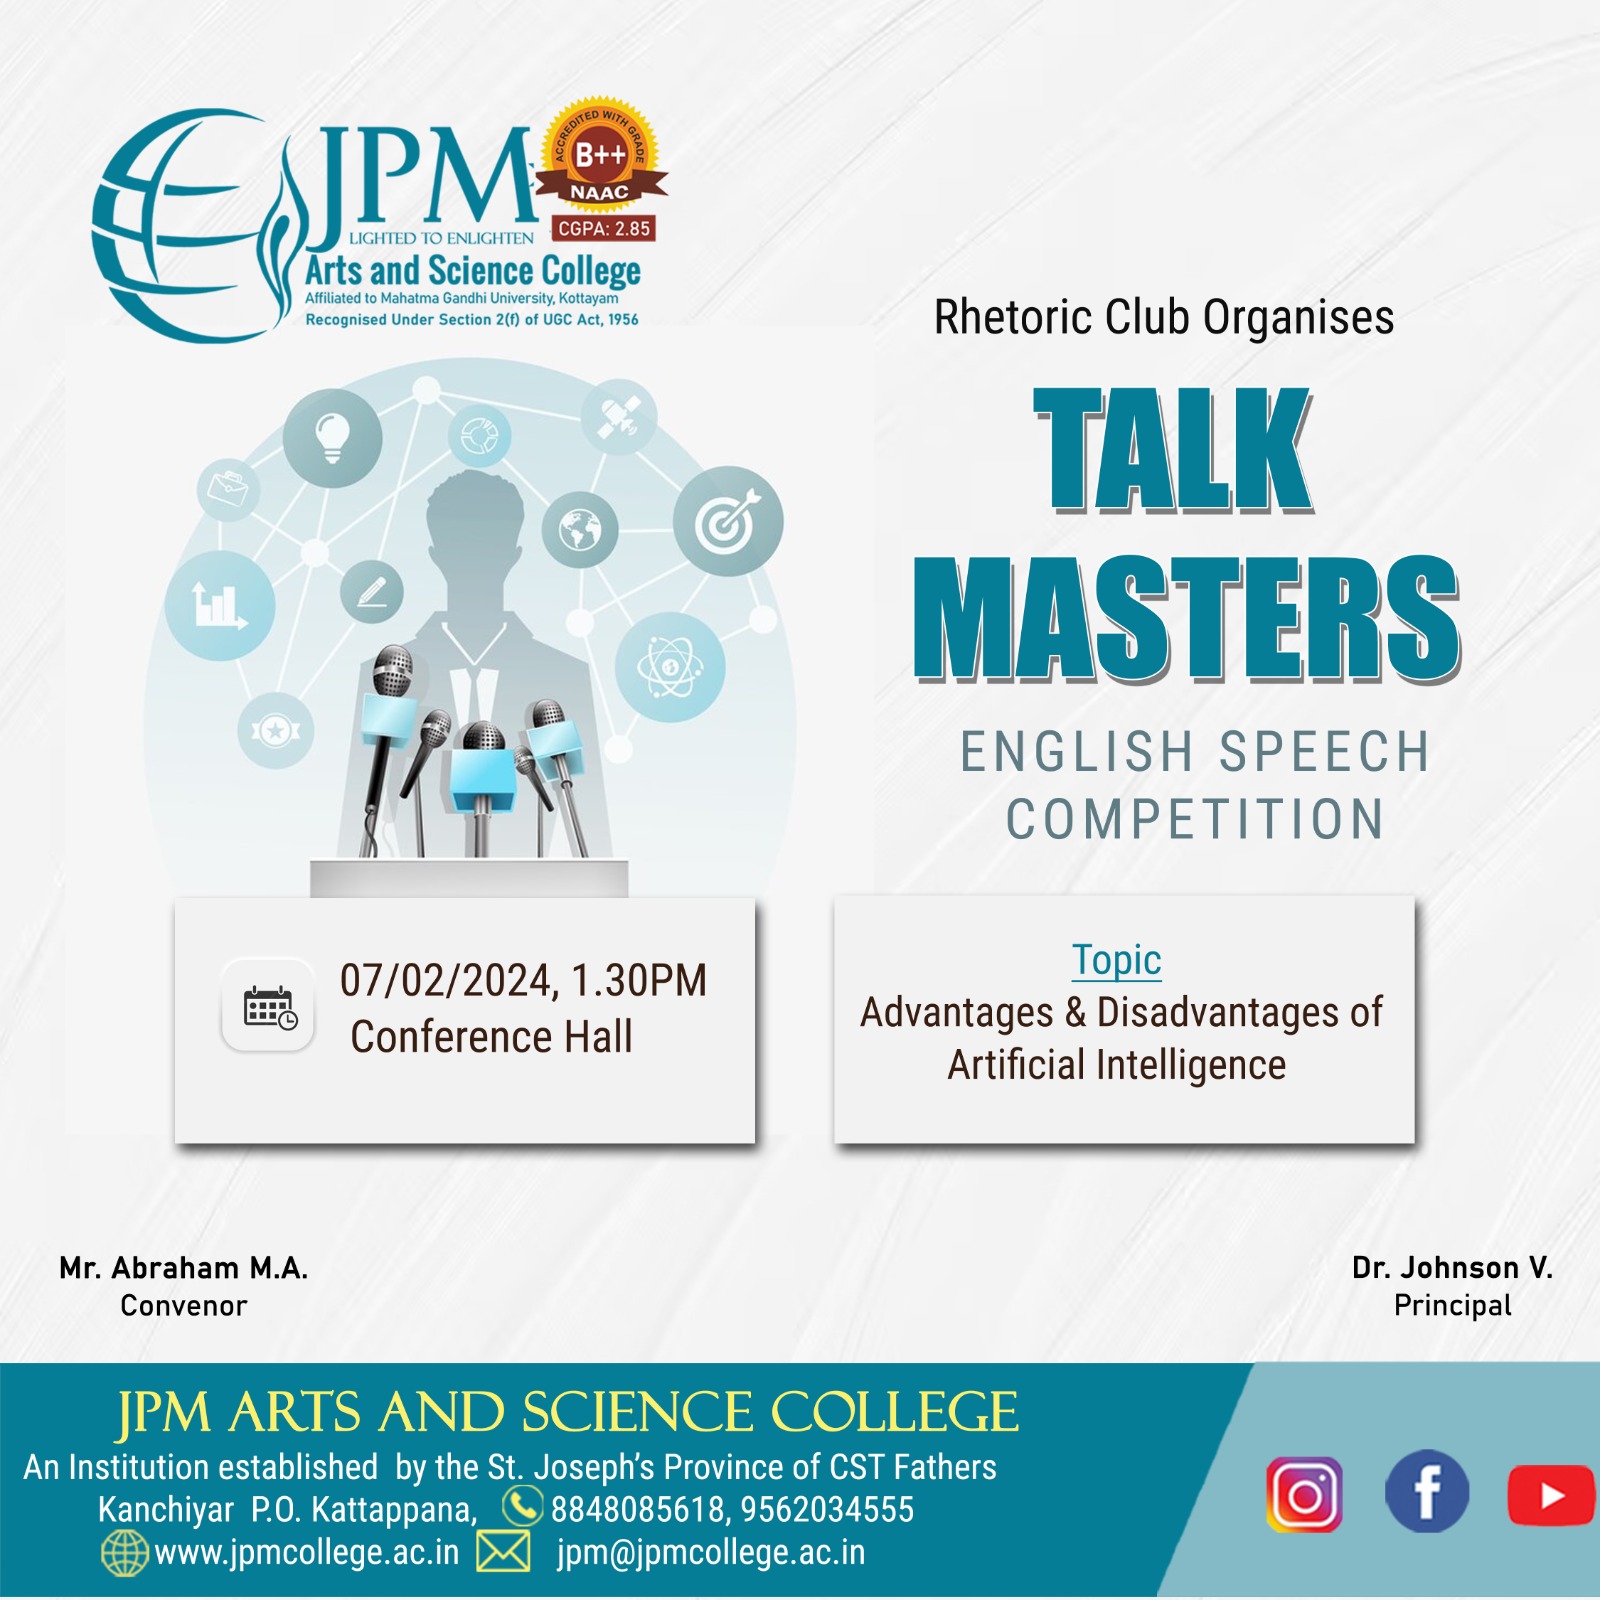 TALK MASTERS ENGLISH SPEECH COMPETITION